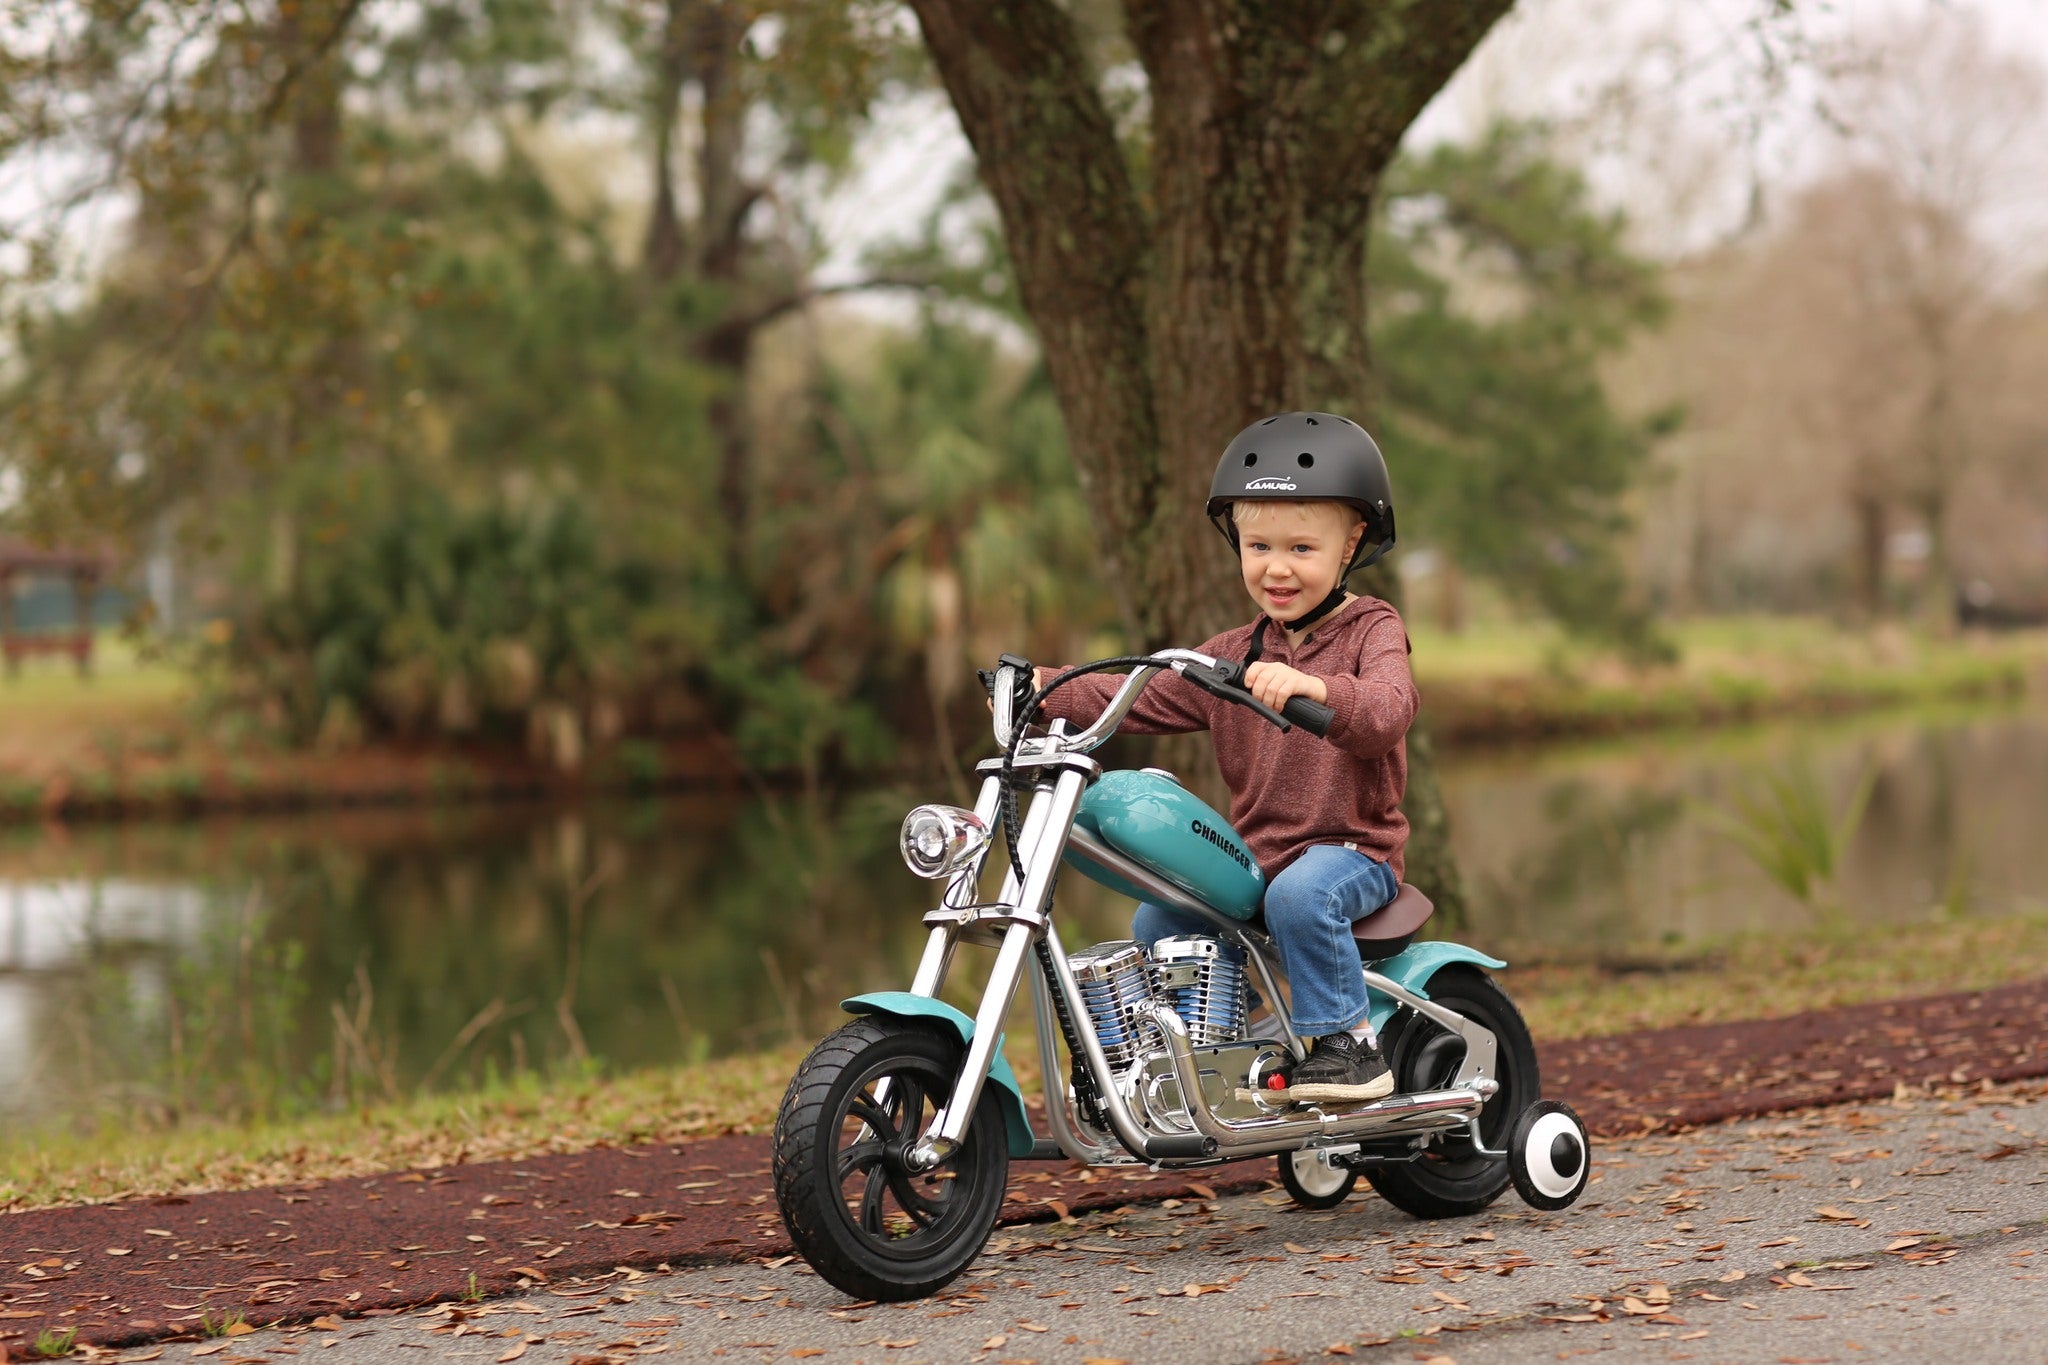 Essential Factors to Consider When Buying Your Child's First Motorcycle